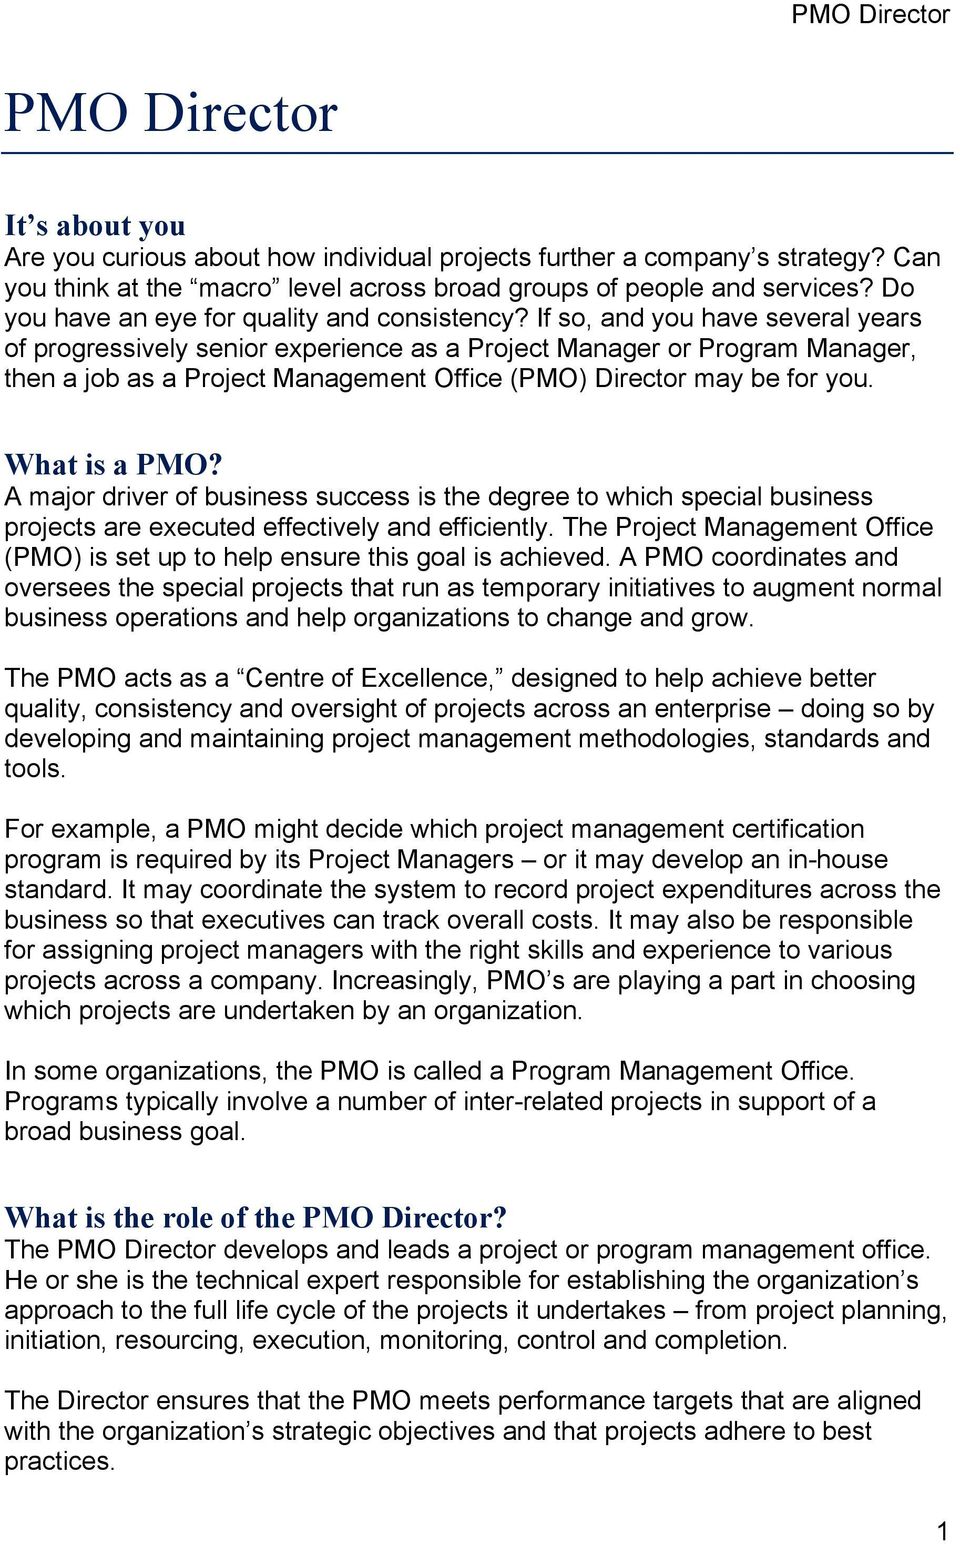 If so, and you have several years of progressively senior experience as a Project Manager or Program Manager, then a job as a Project Management Office (PMO) Director may be for you. What is a PMO?